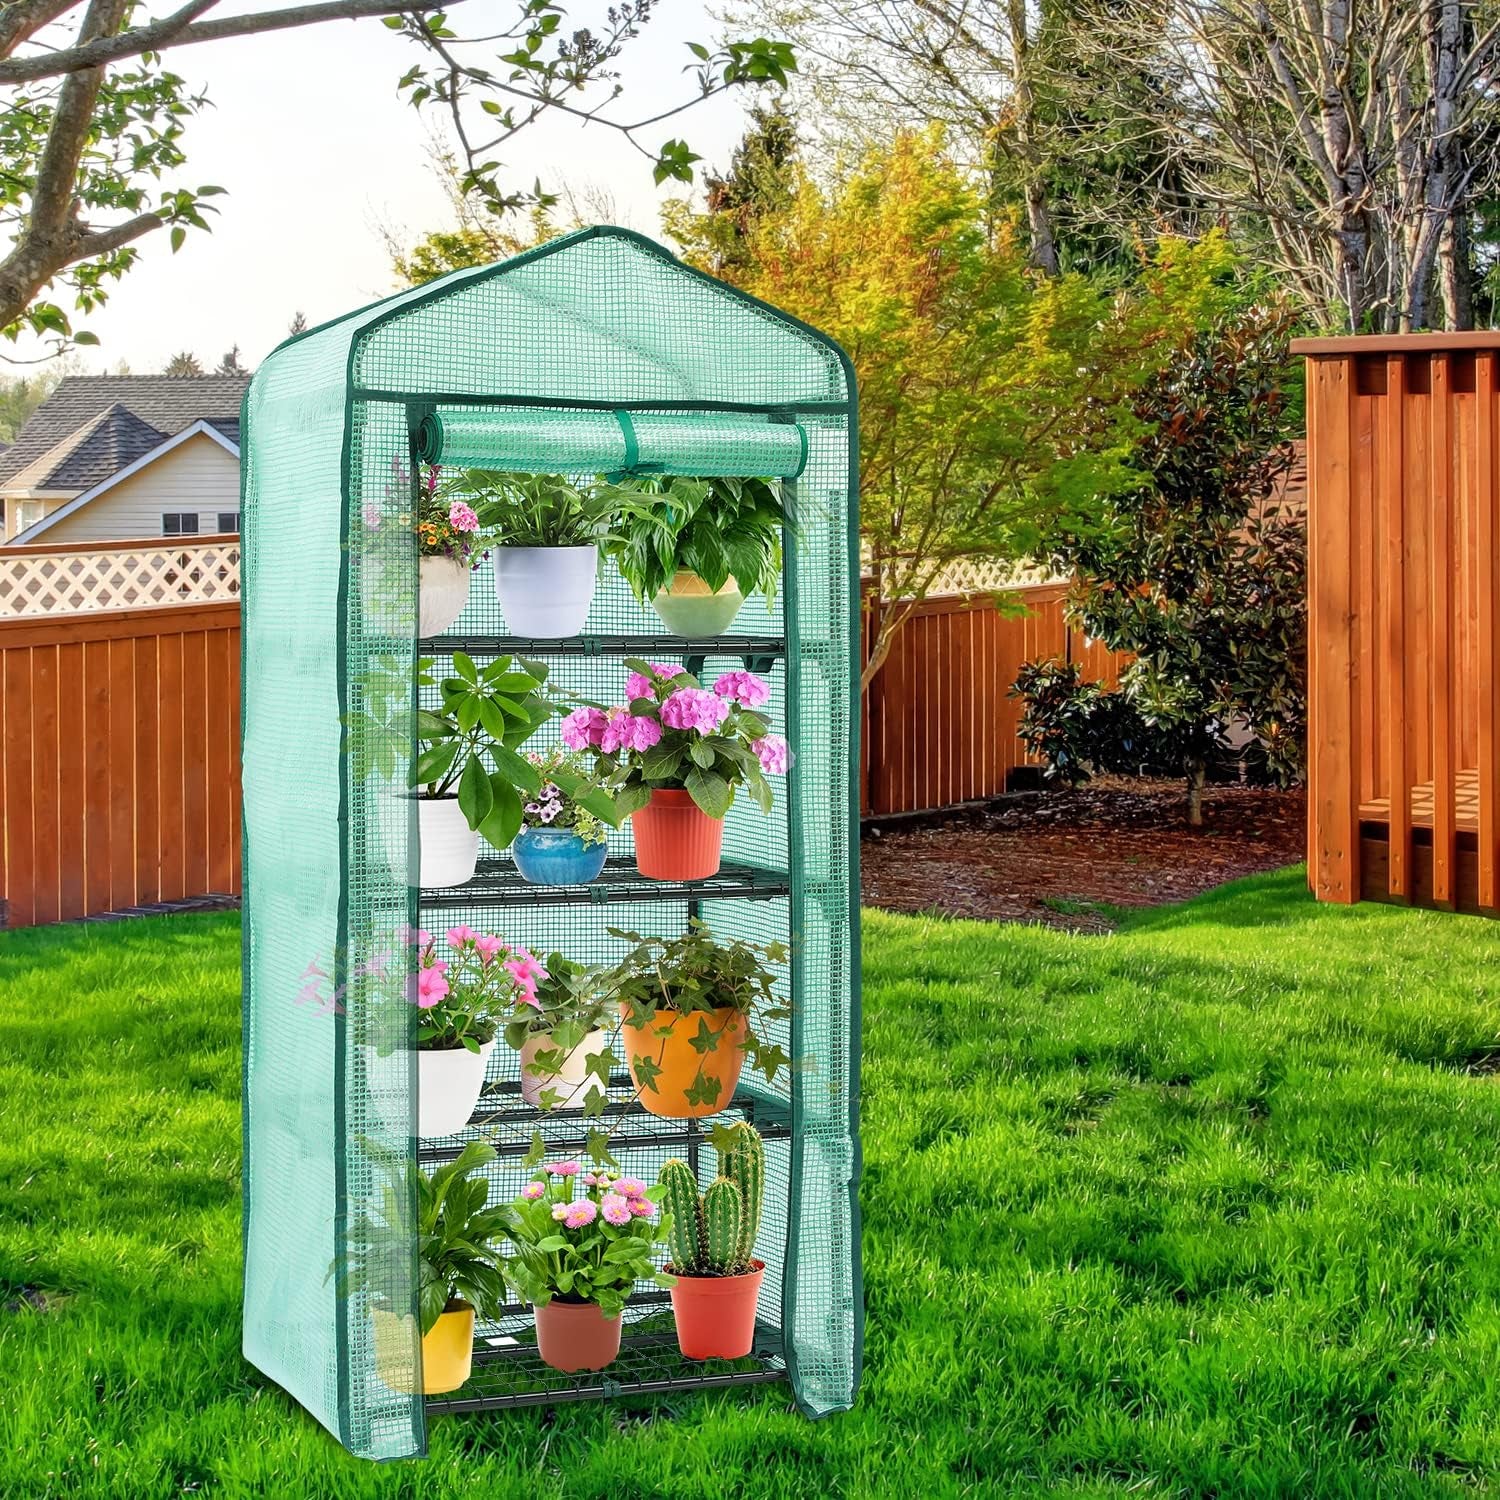 Mini Greenhouse for Indoor Outdoor, Small Plastic Plant Green House 4-Tier Rack Stand Portable Greenhouses with Durable PE Cover for Seedling, 2.5X1.6X5.2 FT, Ideal Gardening Gifts for Women Men - Design By Technique